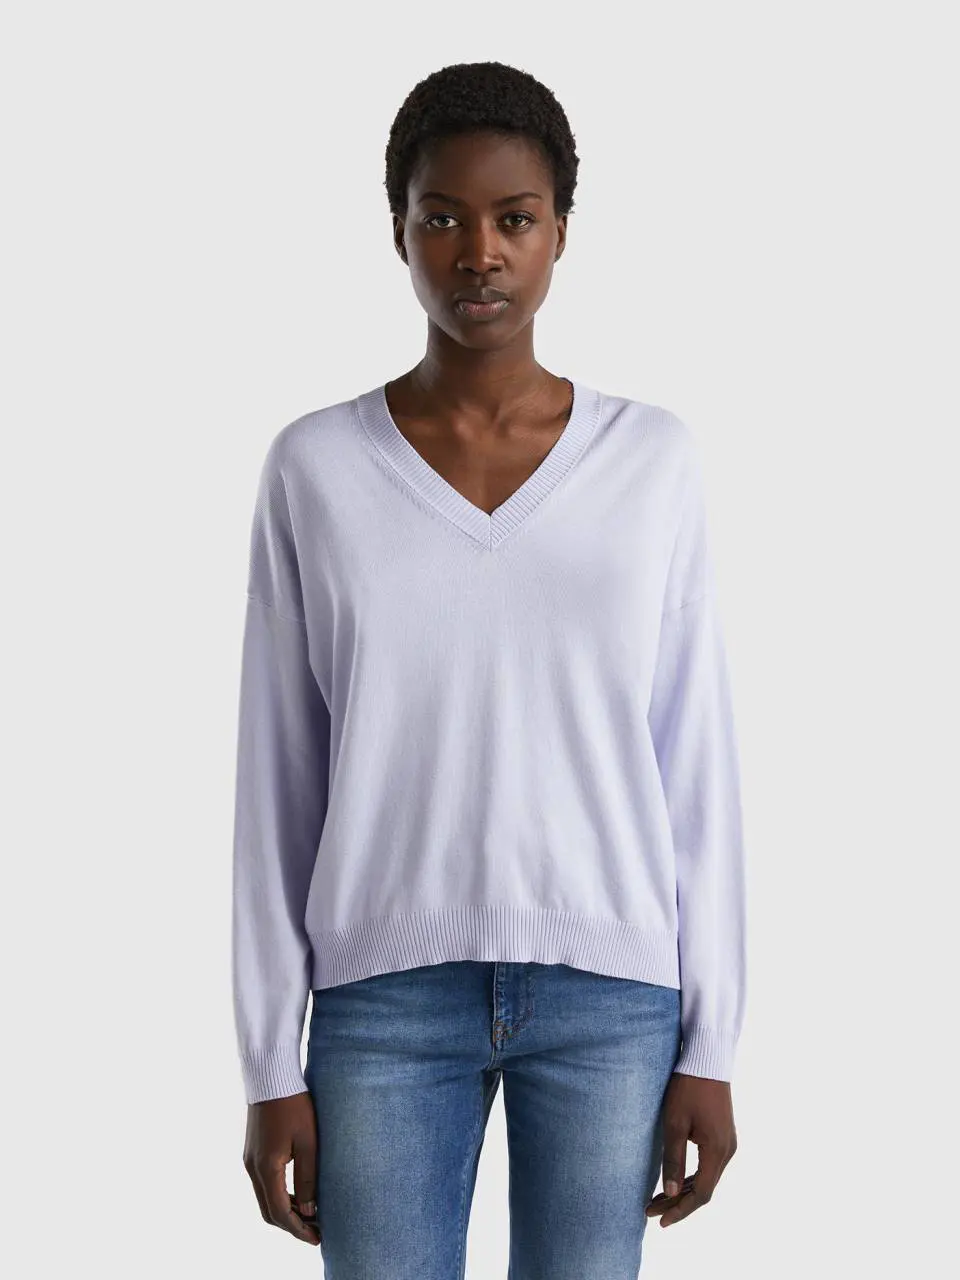 Benetton sweater with v-neck. 1